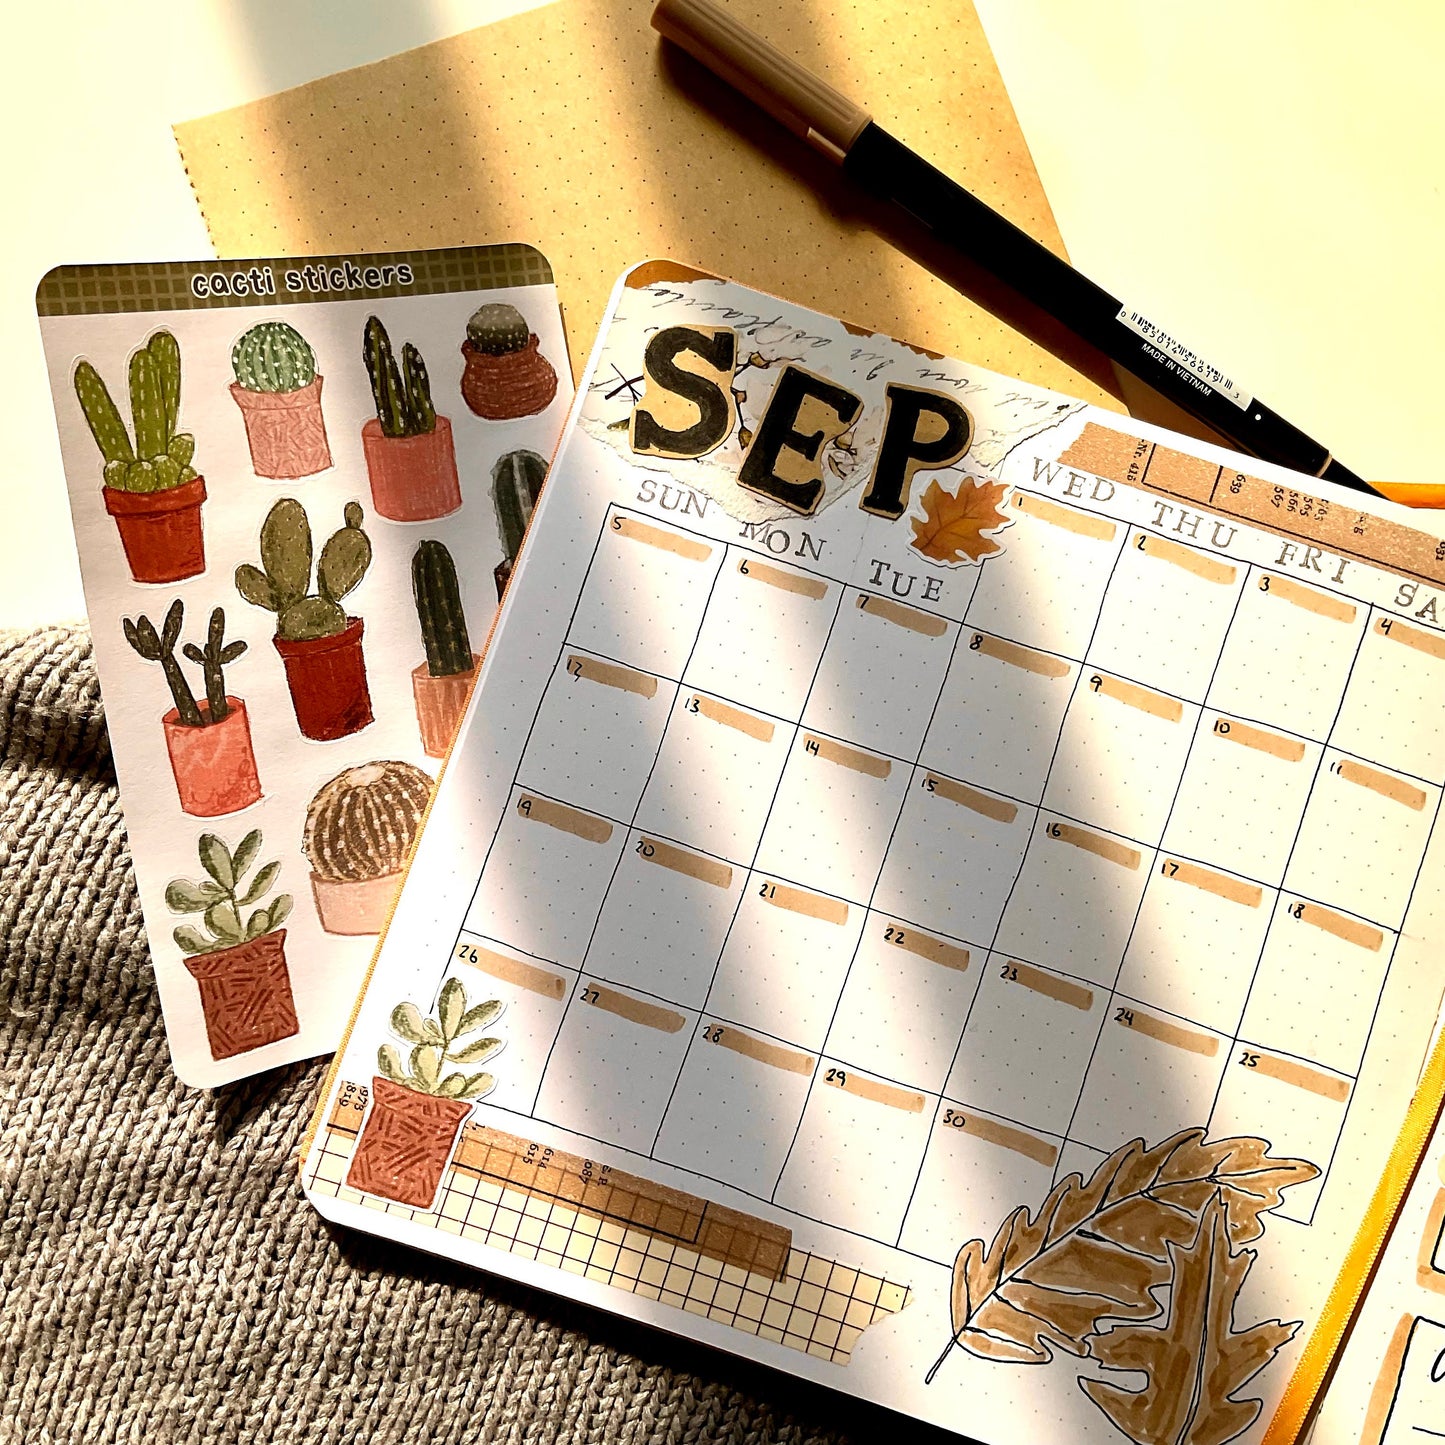 A square notebook page decorated with stickers and markers. It's the monthly calendar for September.